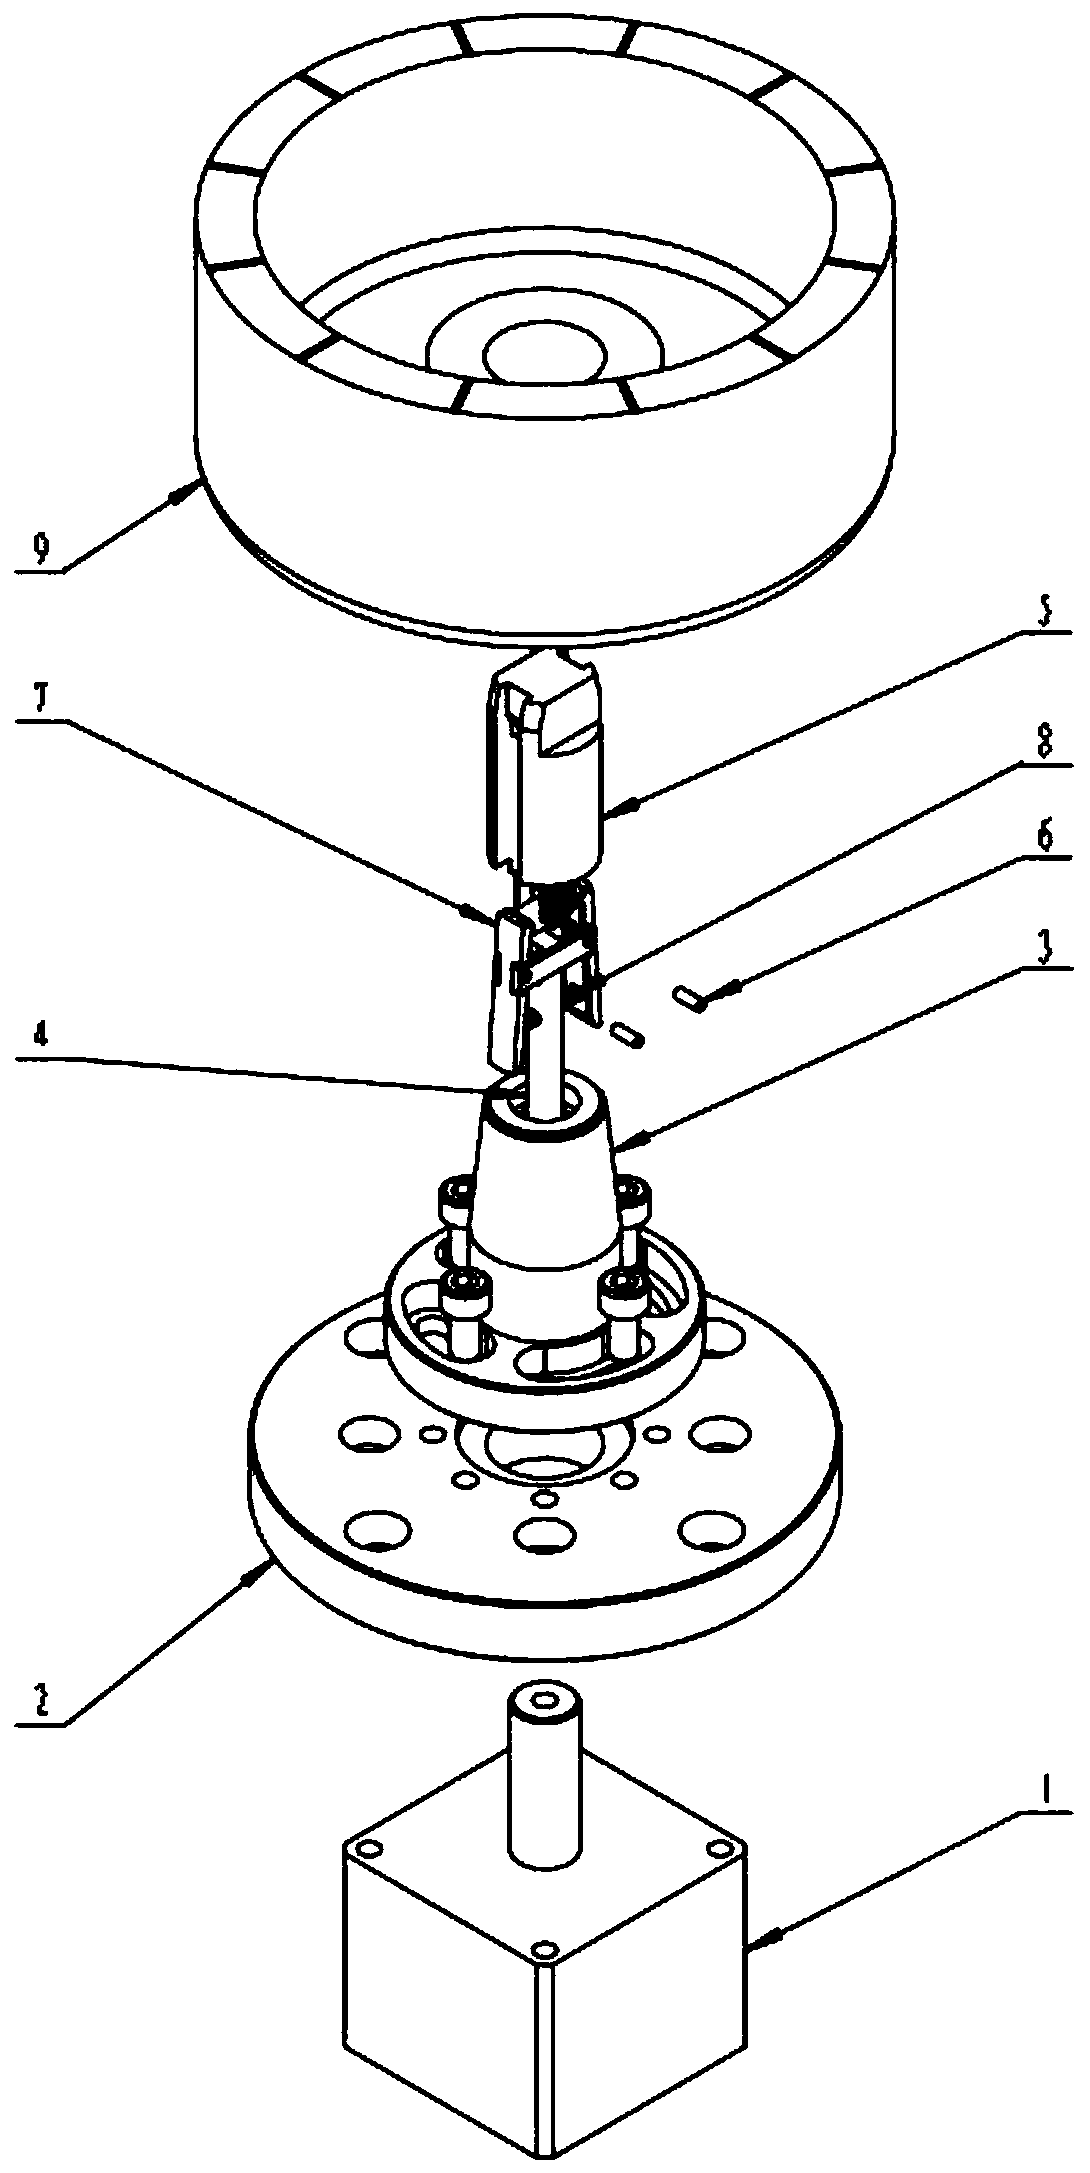 Automatic centering and pressing device for balancing machine rotor with conical inner hole